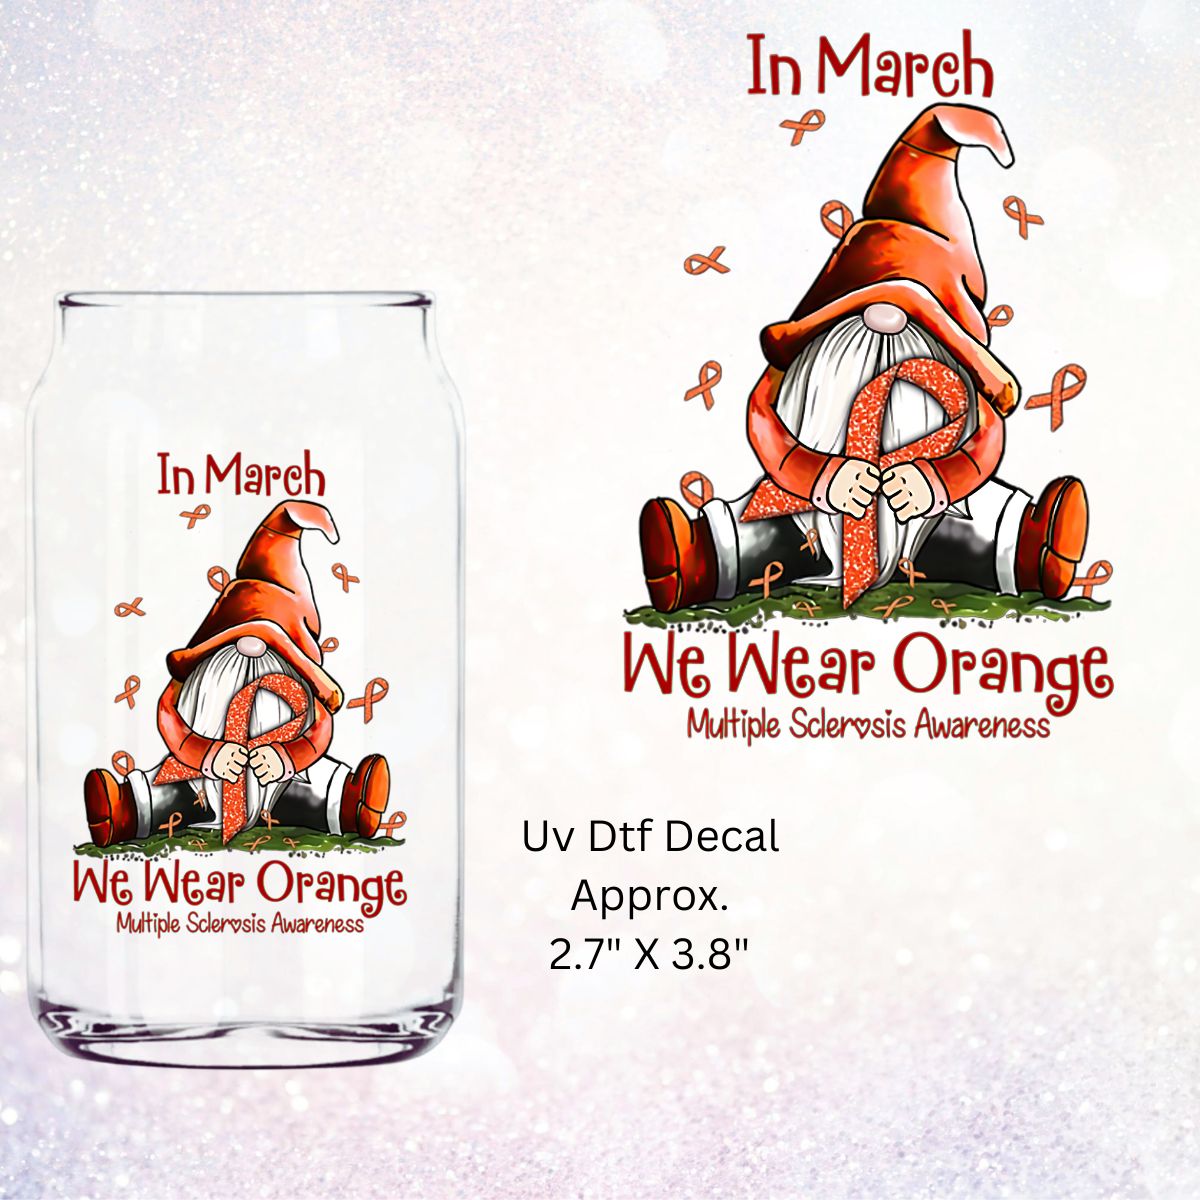 Uv Dtf Decal In March We Wear Orange Multiple Sclerosis Awareness featuring an Orange Gnome